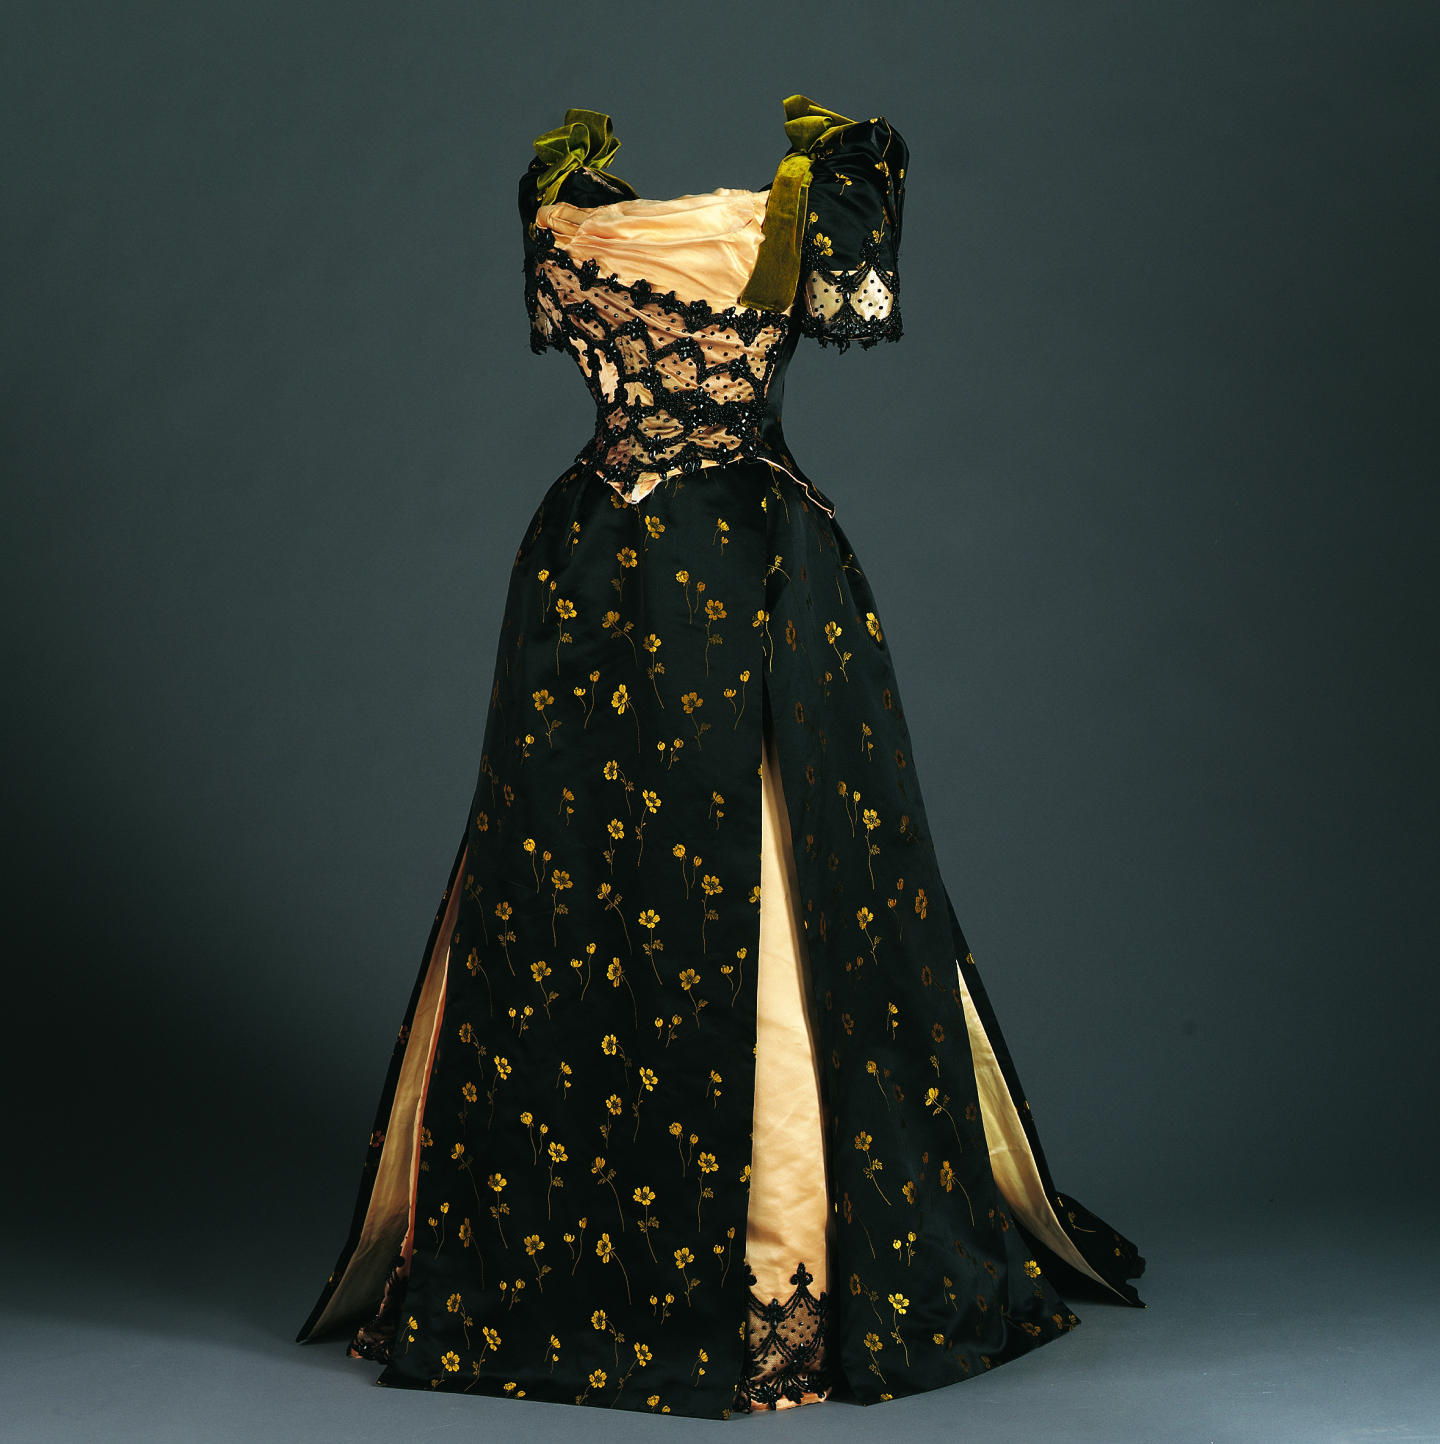 Miss Foley, Black satin brocade bodice with yellow flowers and green velvet bows, c. 1890. Brocaded silk satin, cotton net, and beads. Gift of Mrs. Theodore P. Grosvenor.